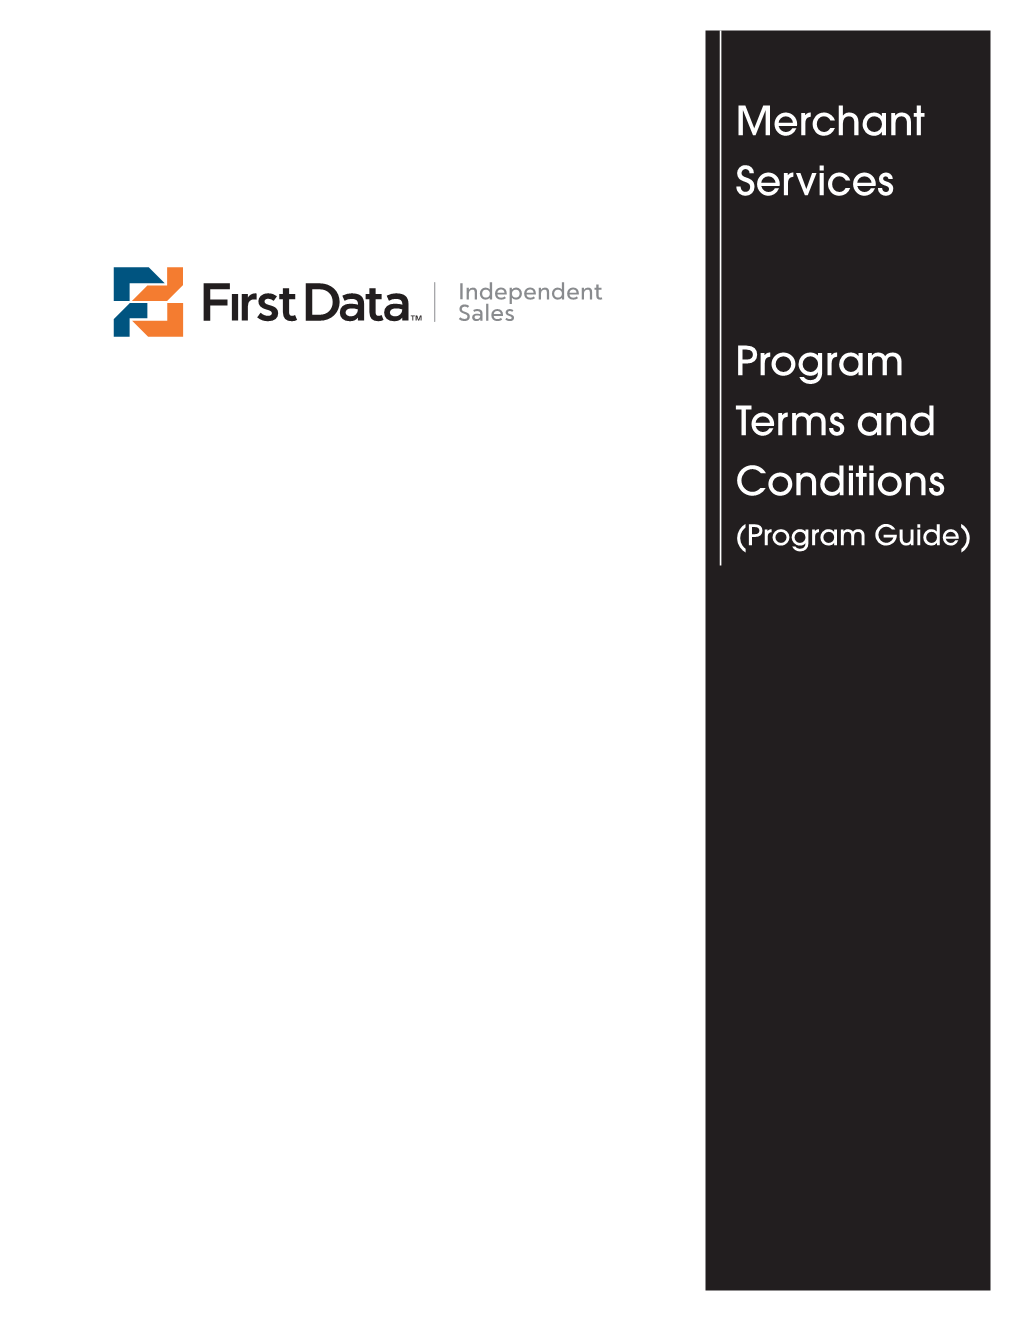 See the First Data Program Guide